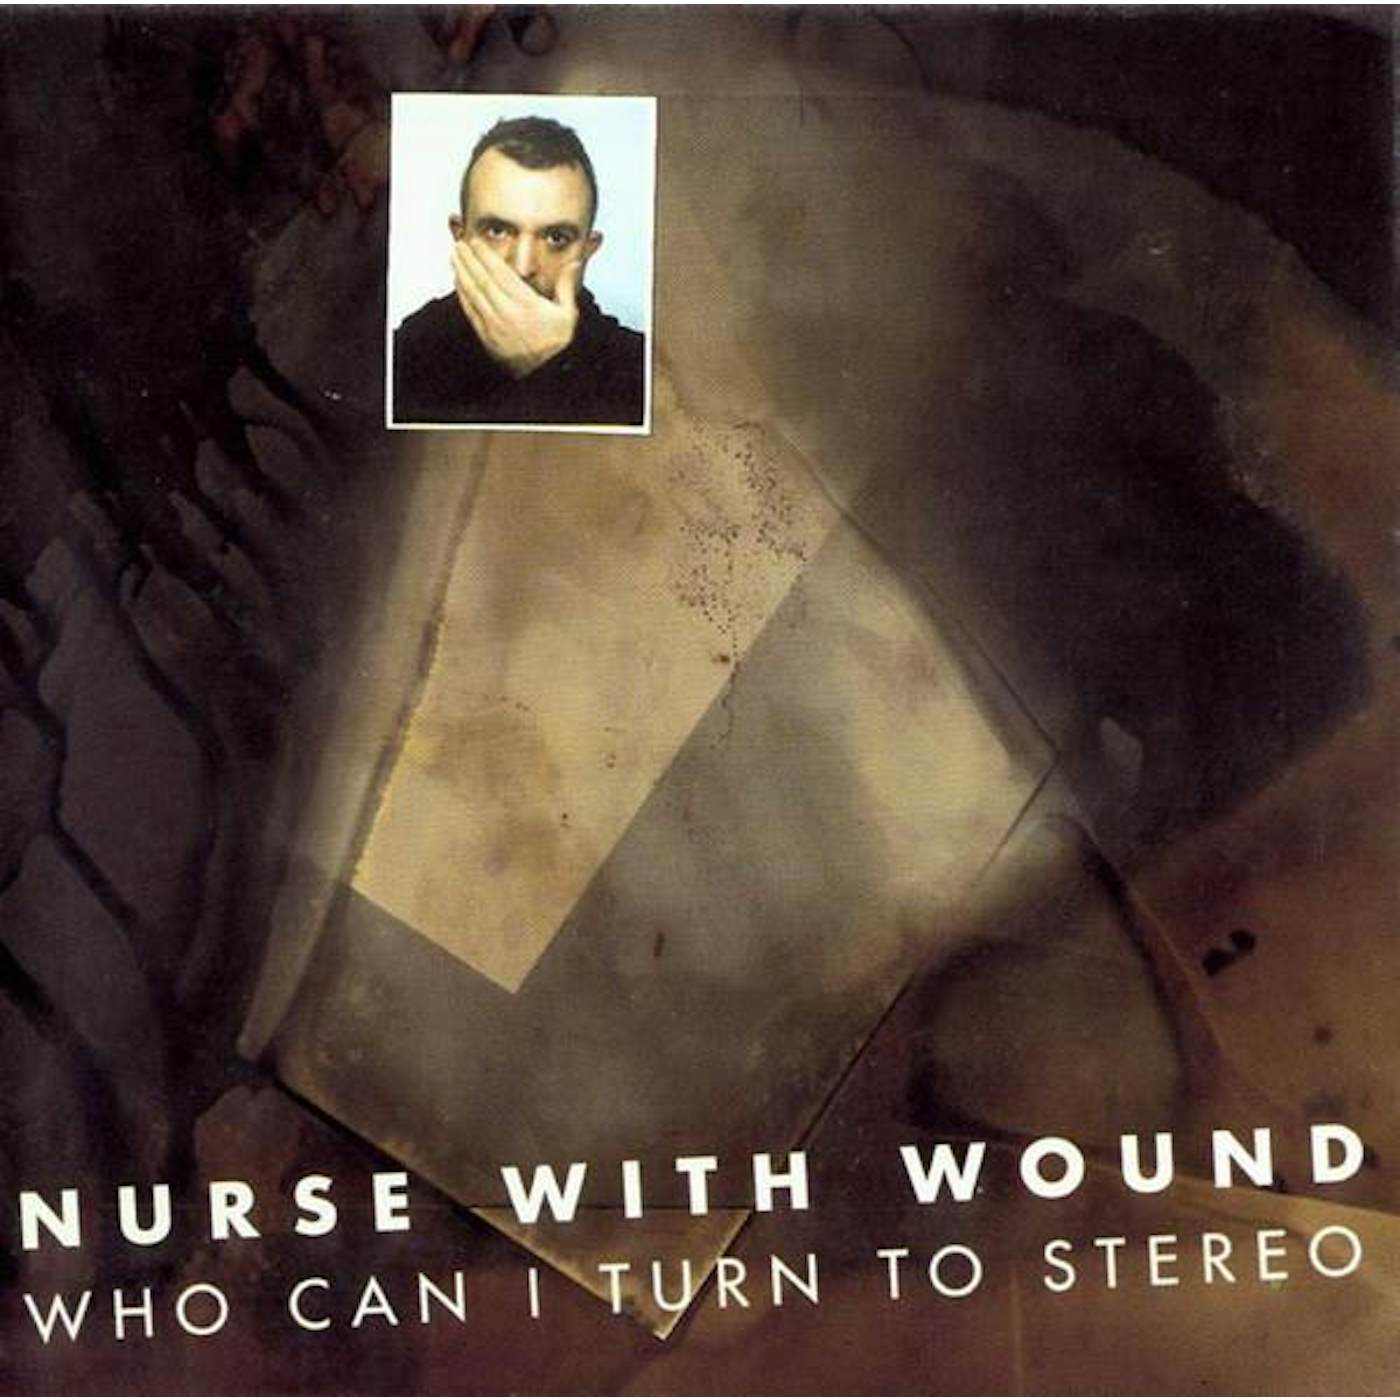 Nurse With Wound Who Can I Turn To Stereo Vinyl Record